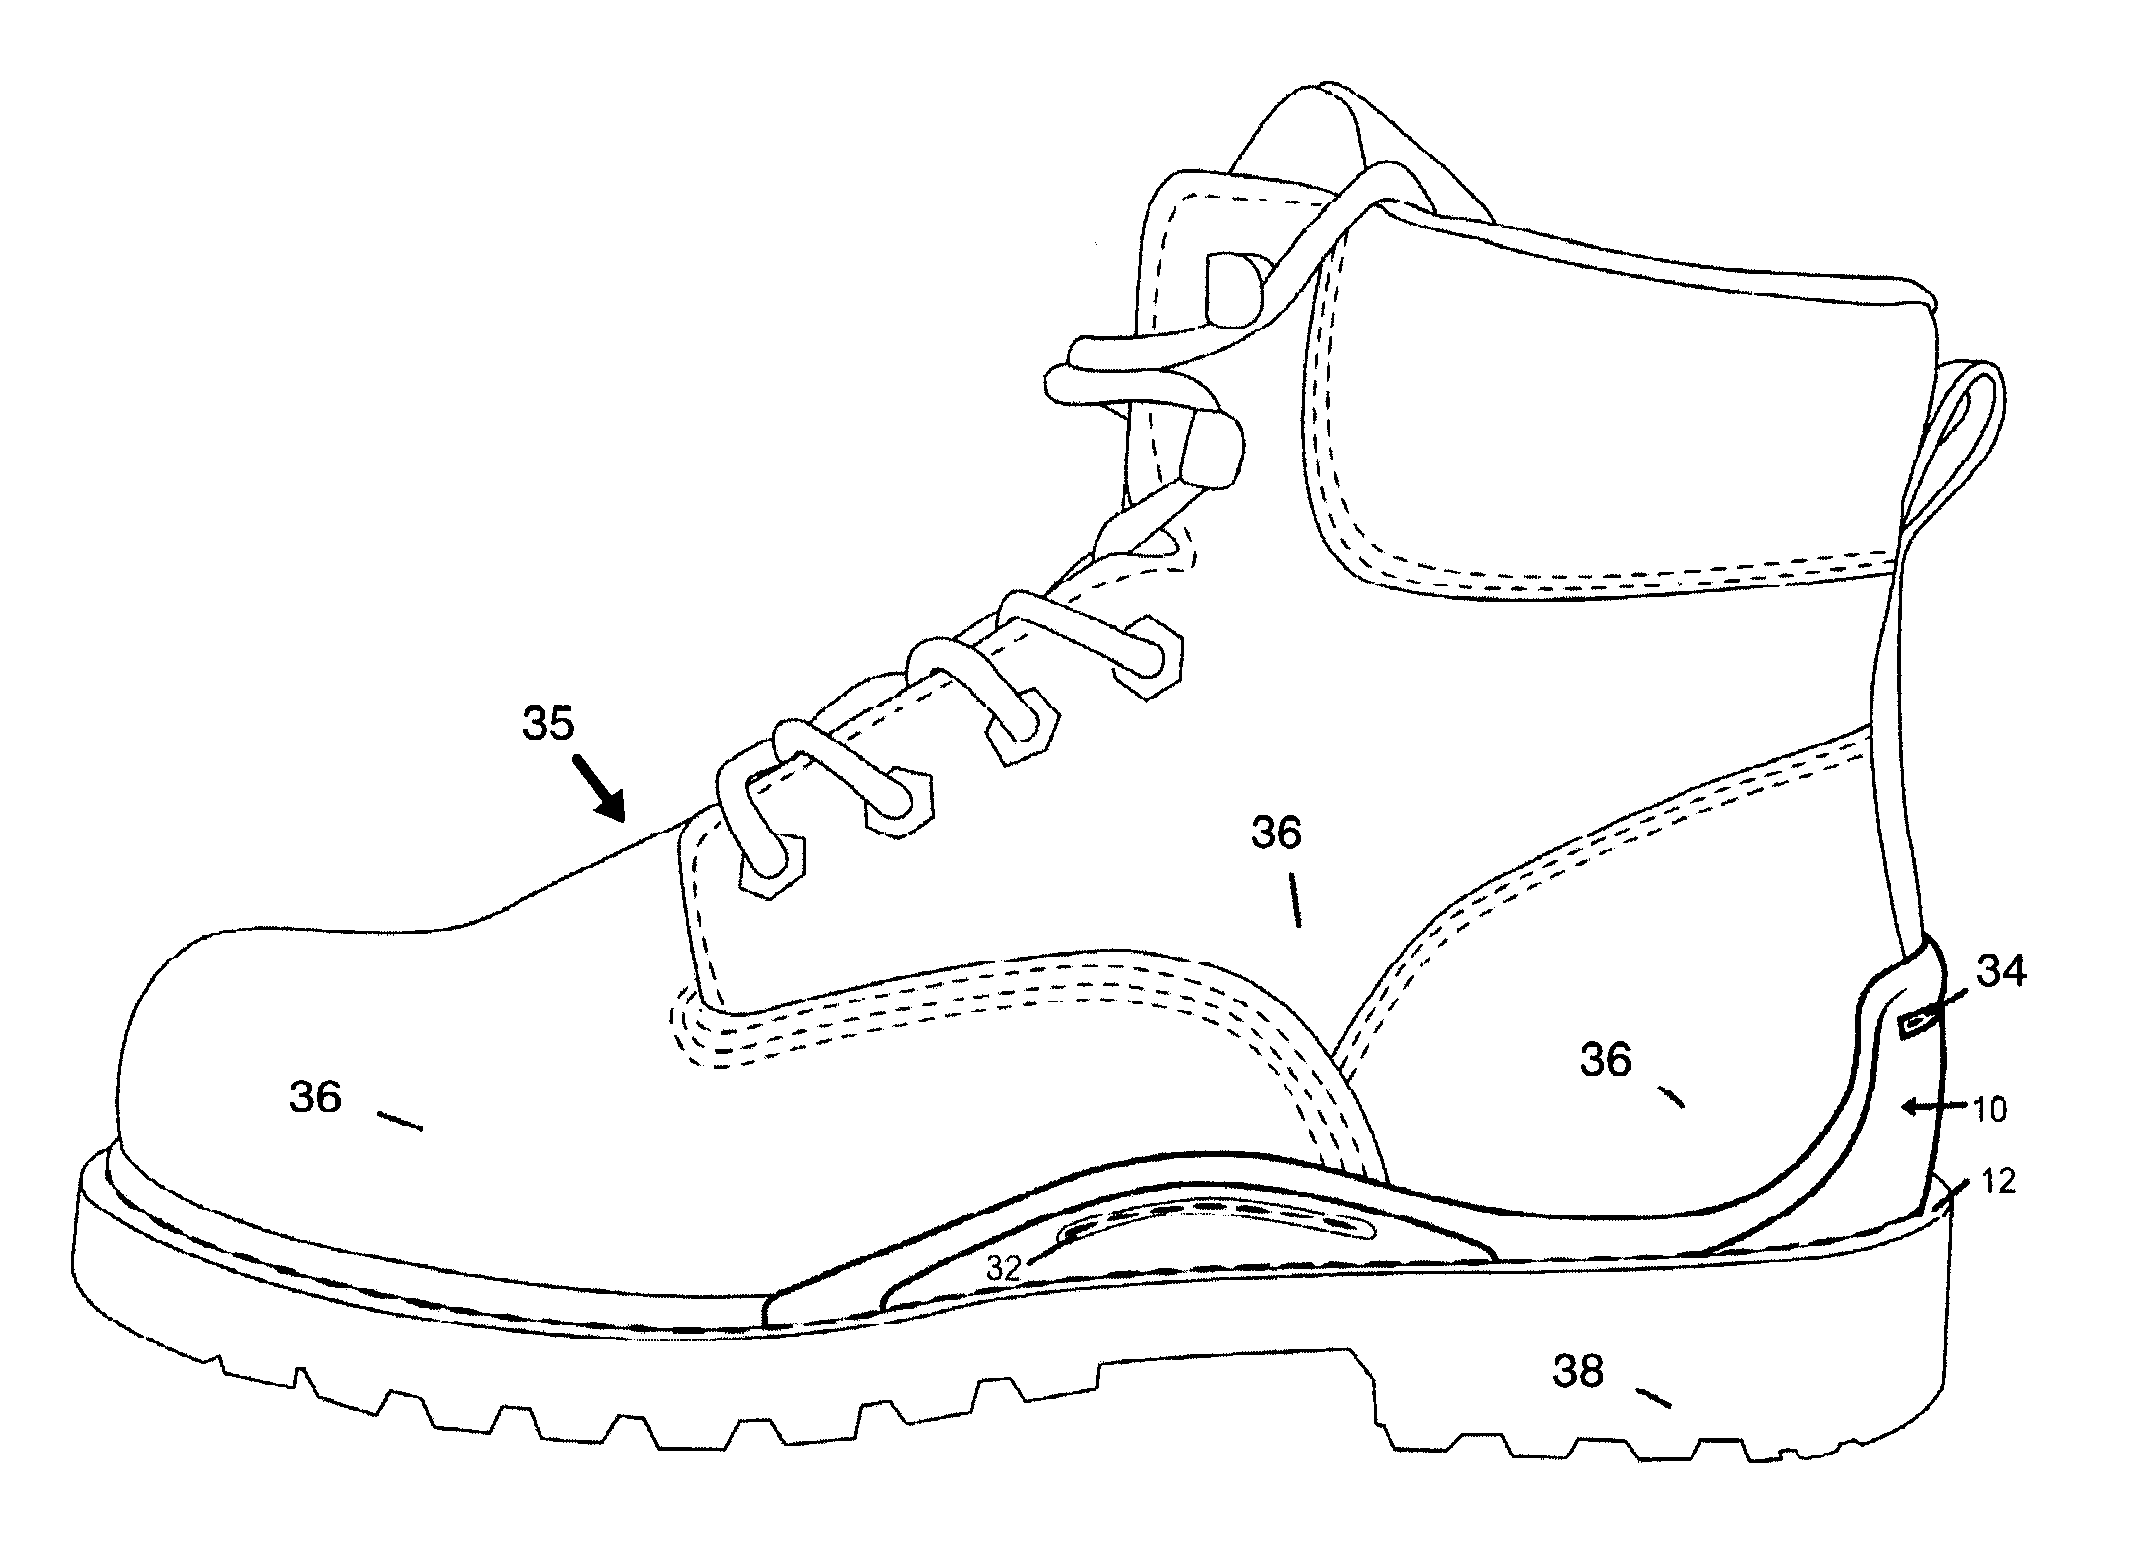 External stabilizing structure for work boots